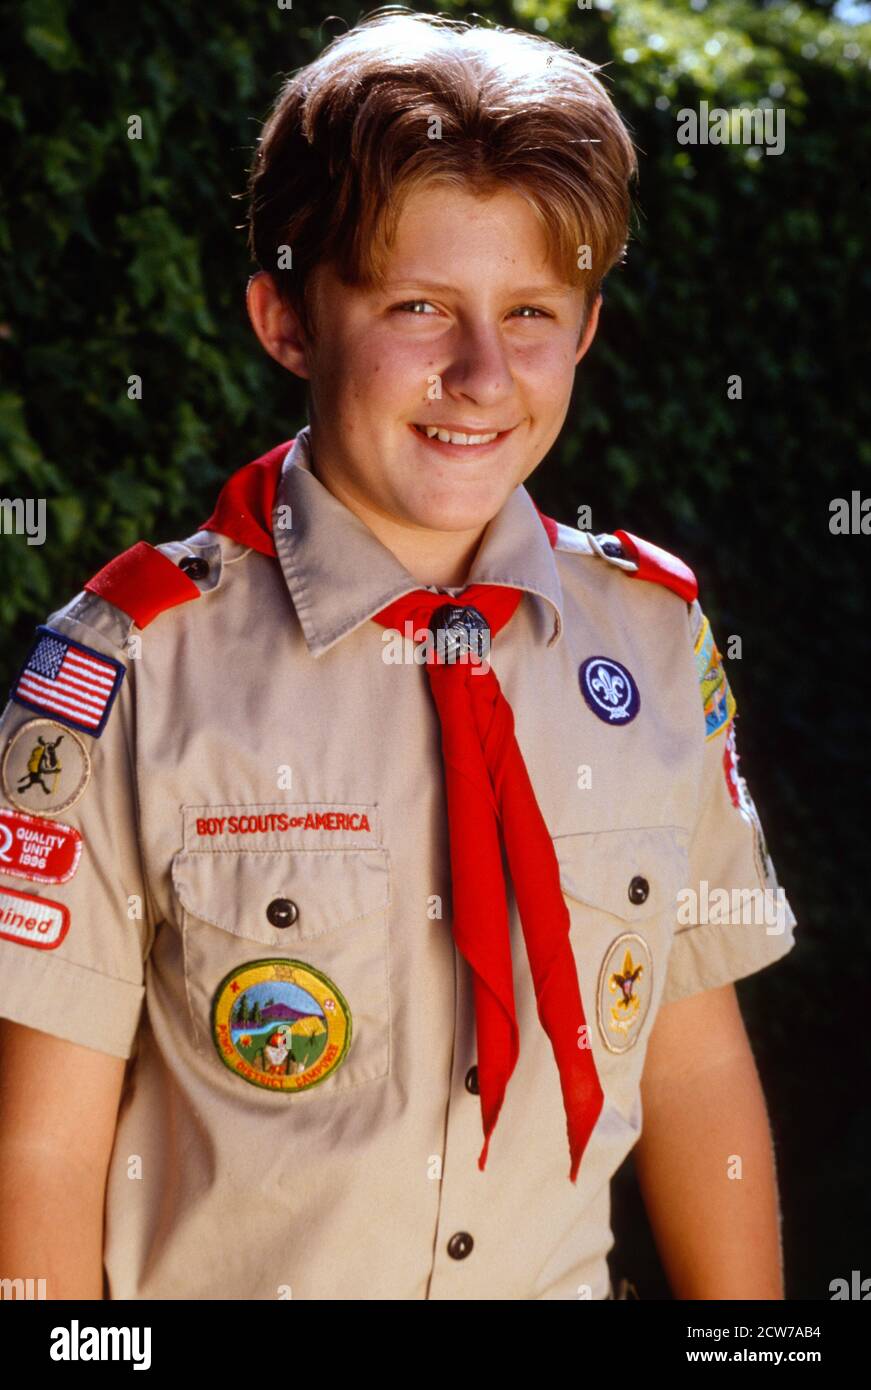 Boy Scout in Uniform Smiling at Camera, USA Stock Photo - Alamy